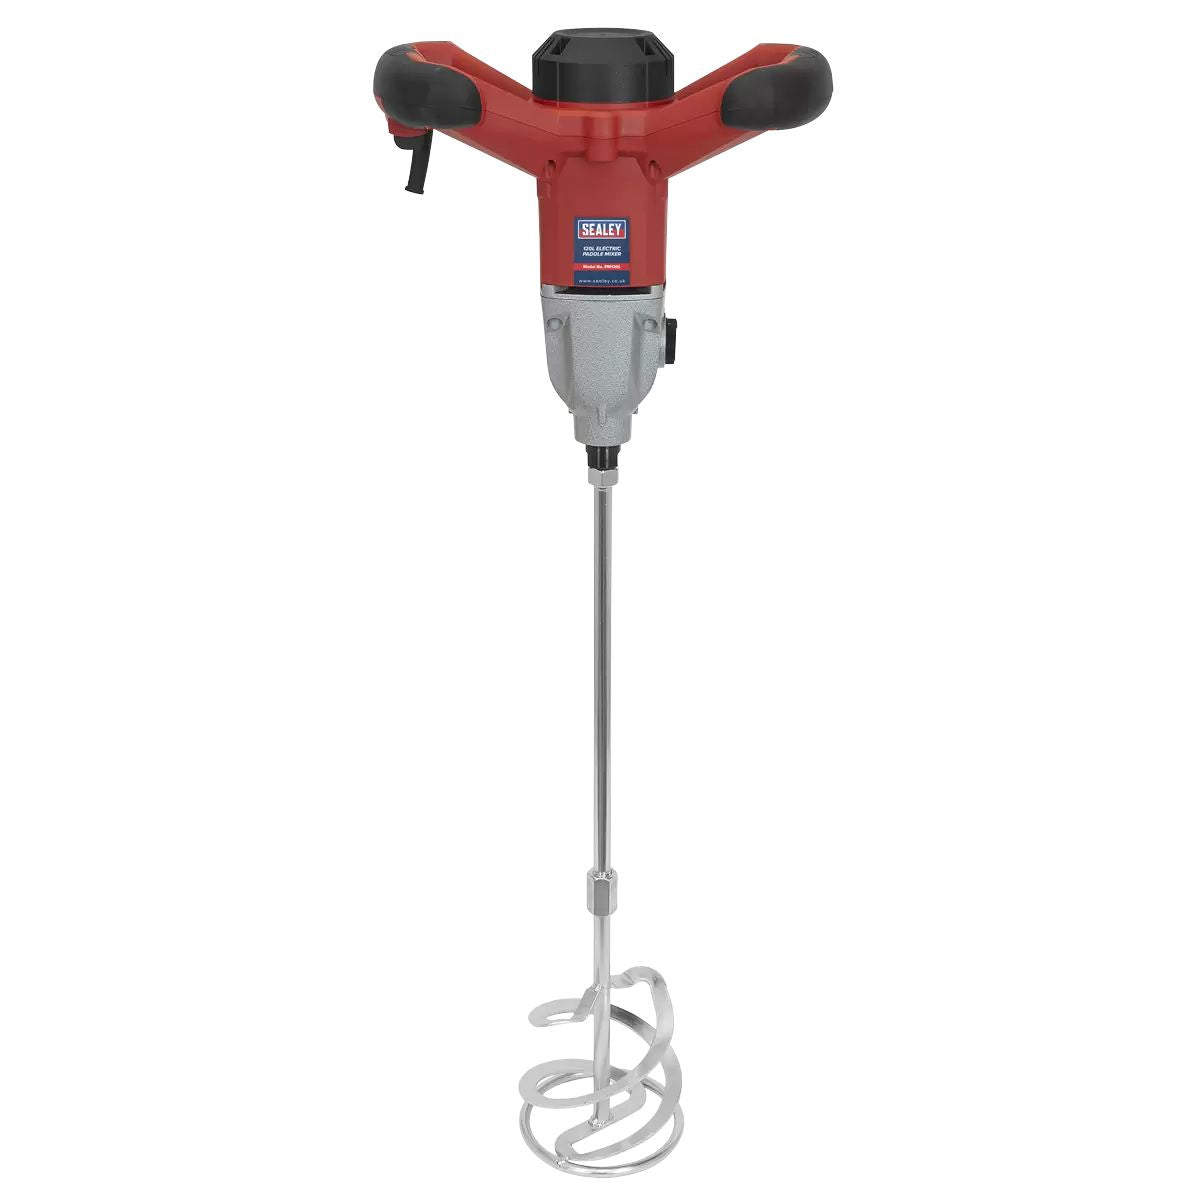 Sealey PM120L Electric Paddle Mixer 1400W/230V